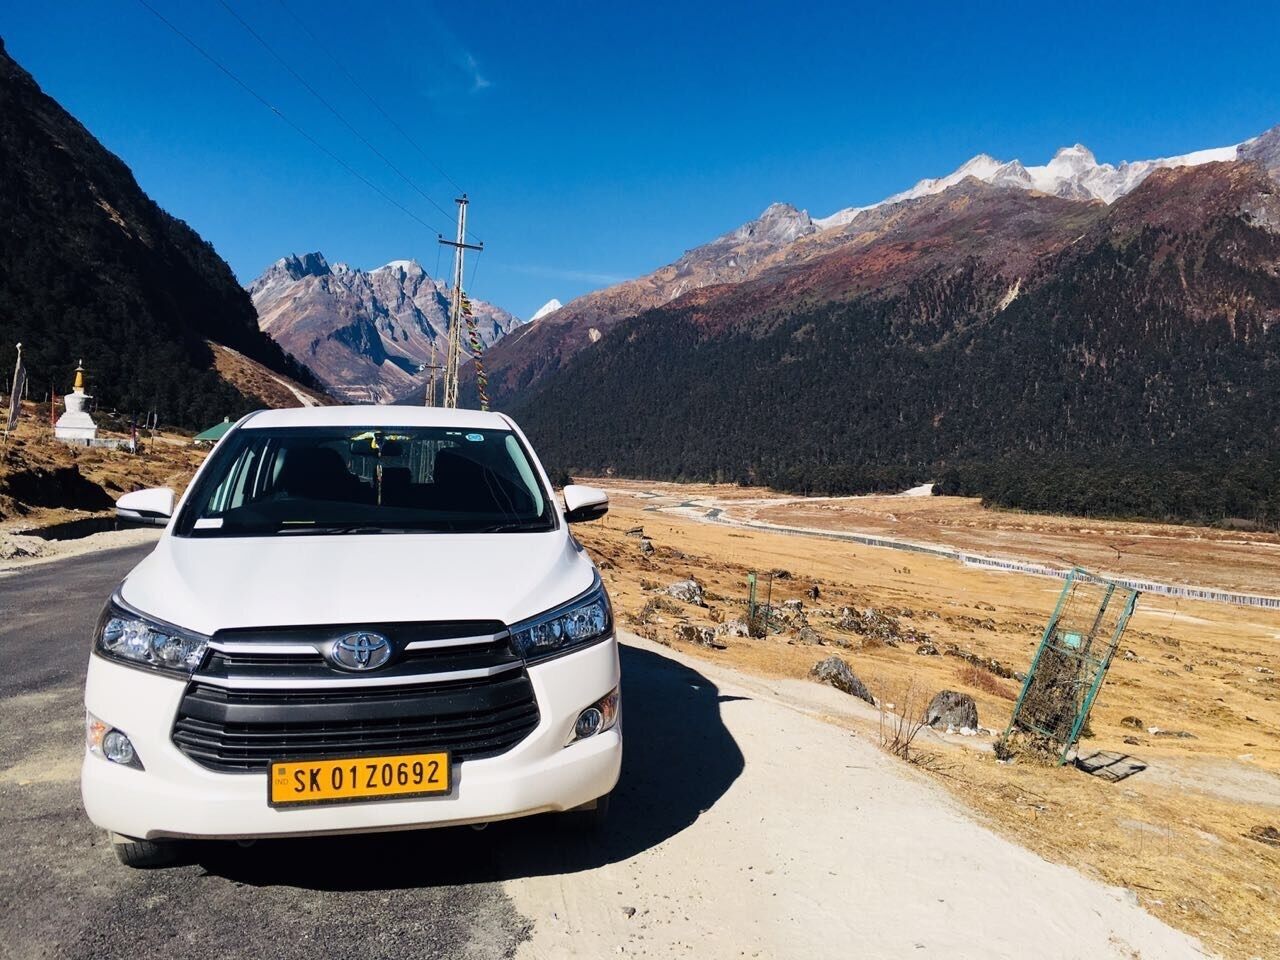 Sikkim Taxi Booking